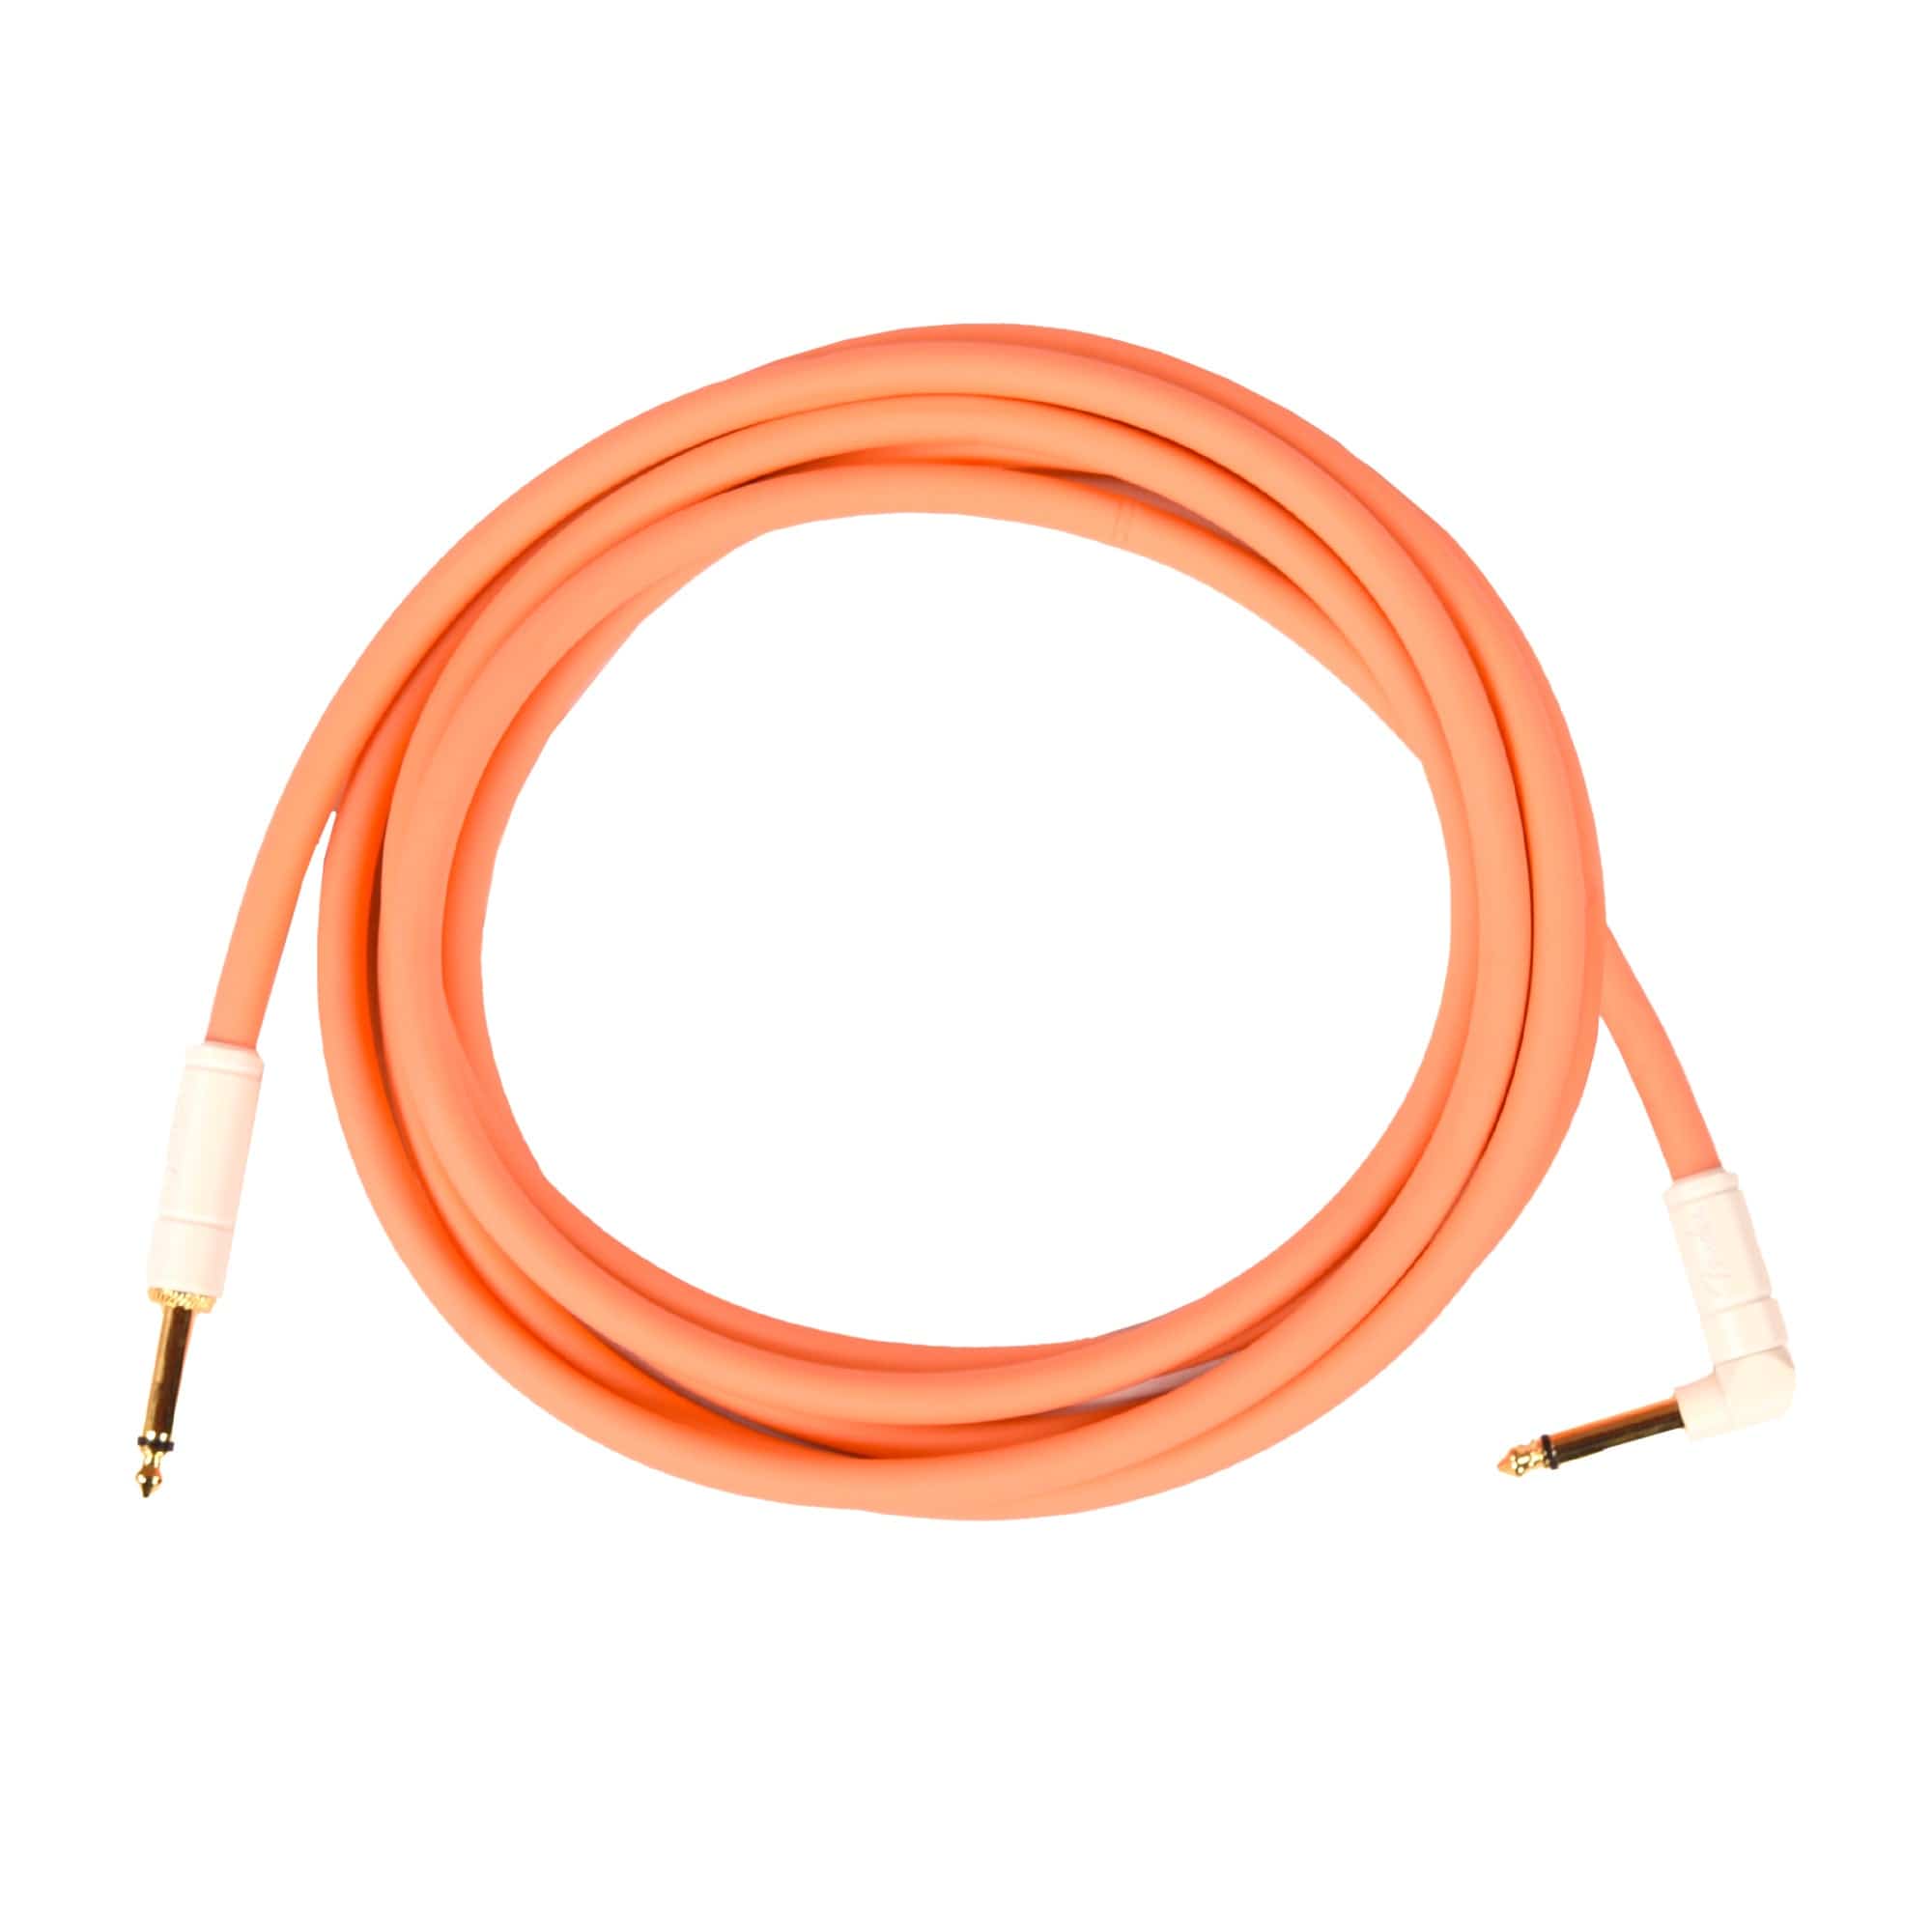 Fender Deluxe Instrument Cable Pacific Peach 18.6' Angle-Straight Accessories / Cables